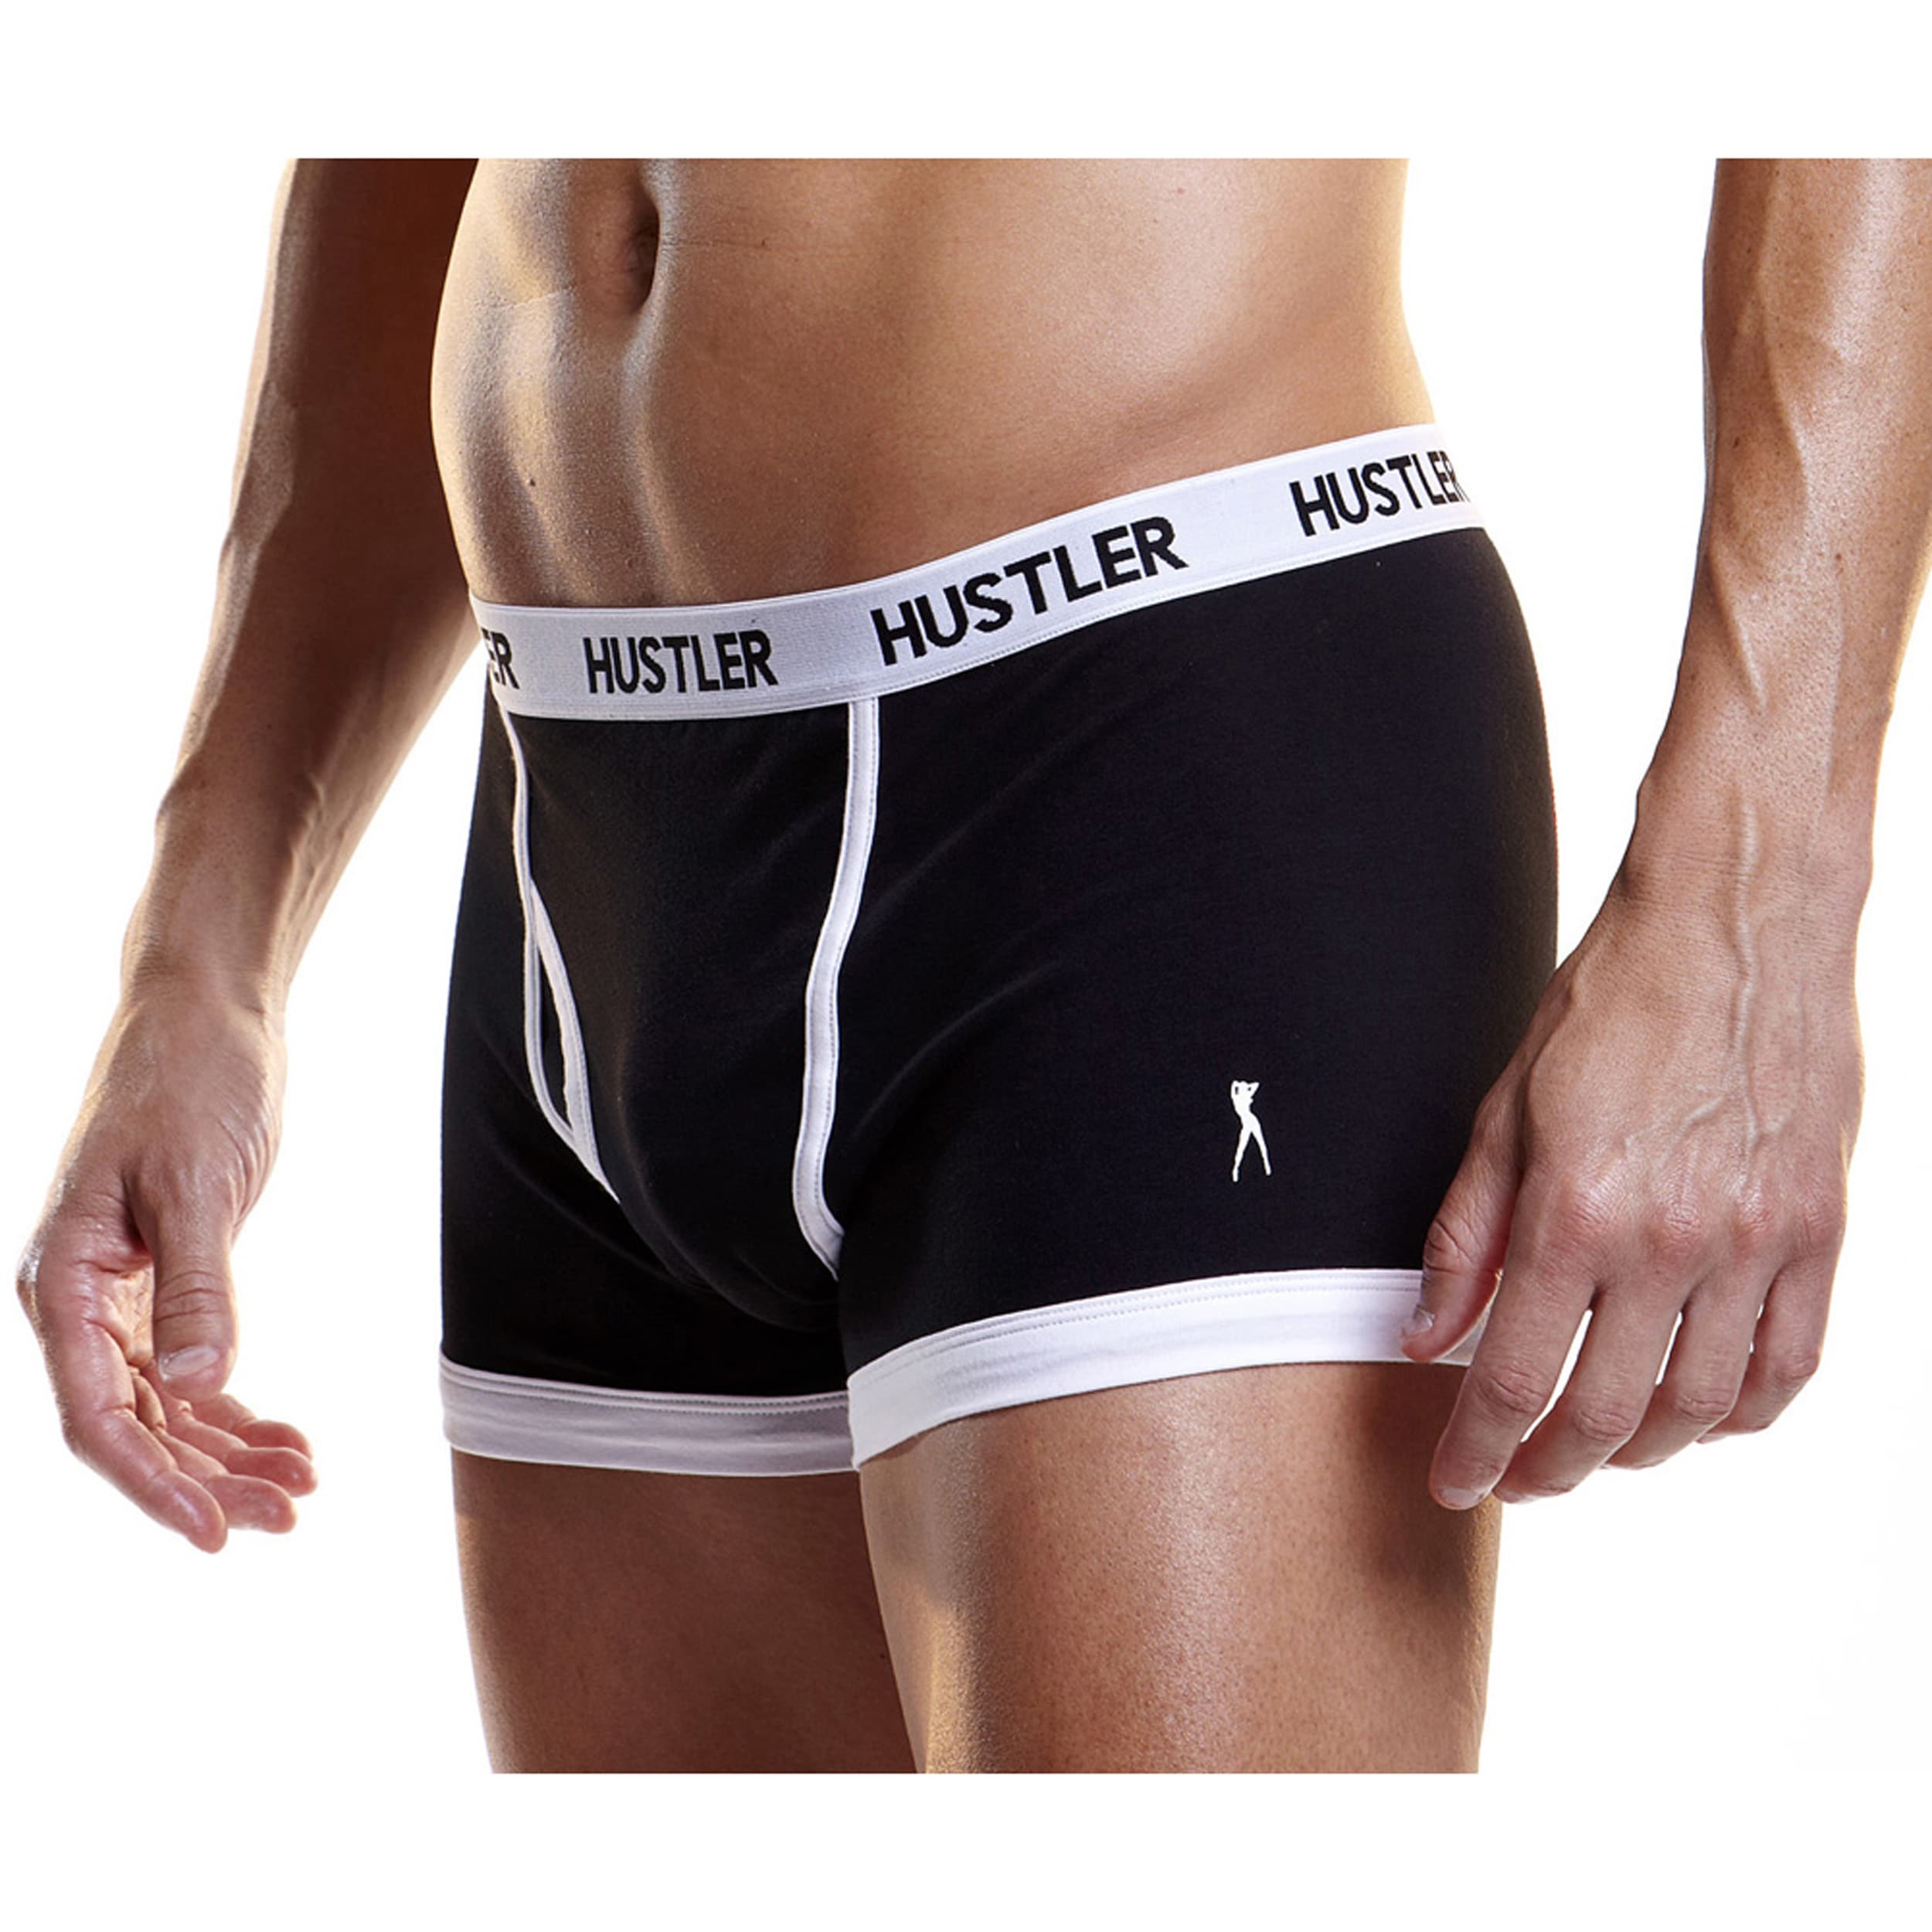 I image Mens Hustler Logo Black Elastic Cotton/ Spandex Trunks (set Of 2) (BlackSizes Medium, large, or extra largeMaterials 95 percent cotton/ 5 percent spandex jersey Care instructions Hand wash cold recommended but can be machine washedModel MH3BLK